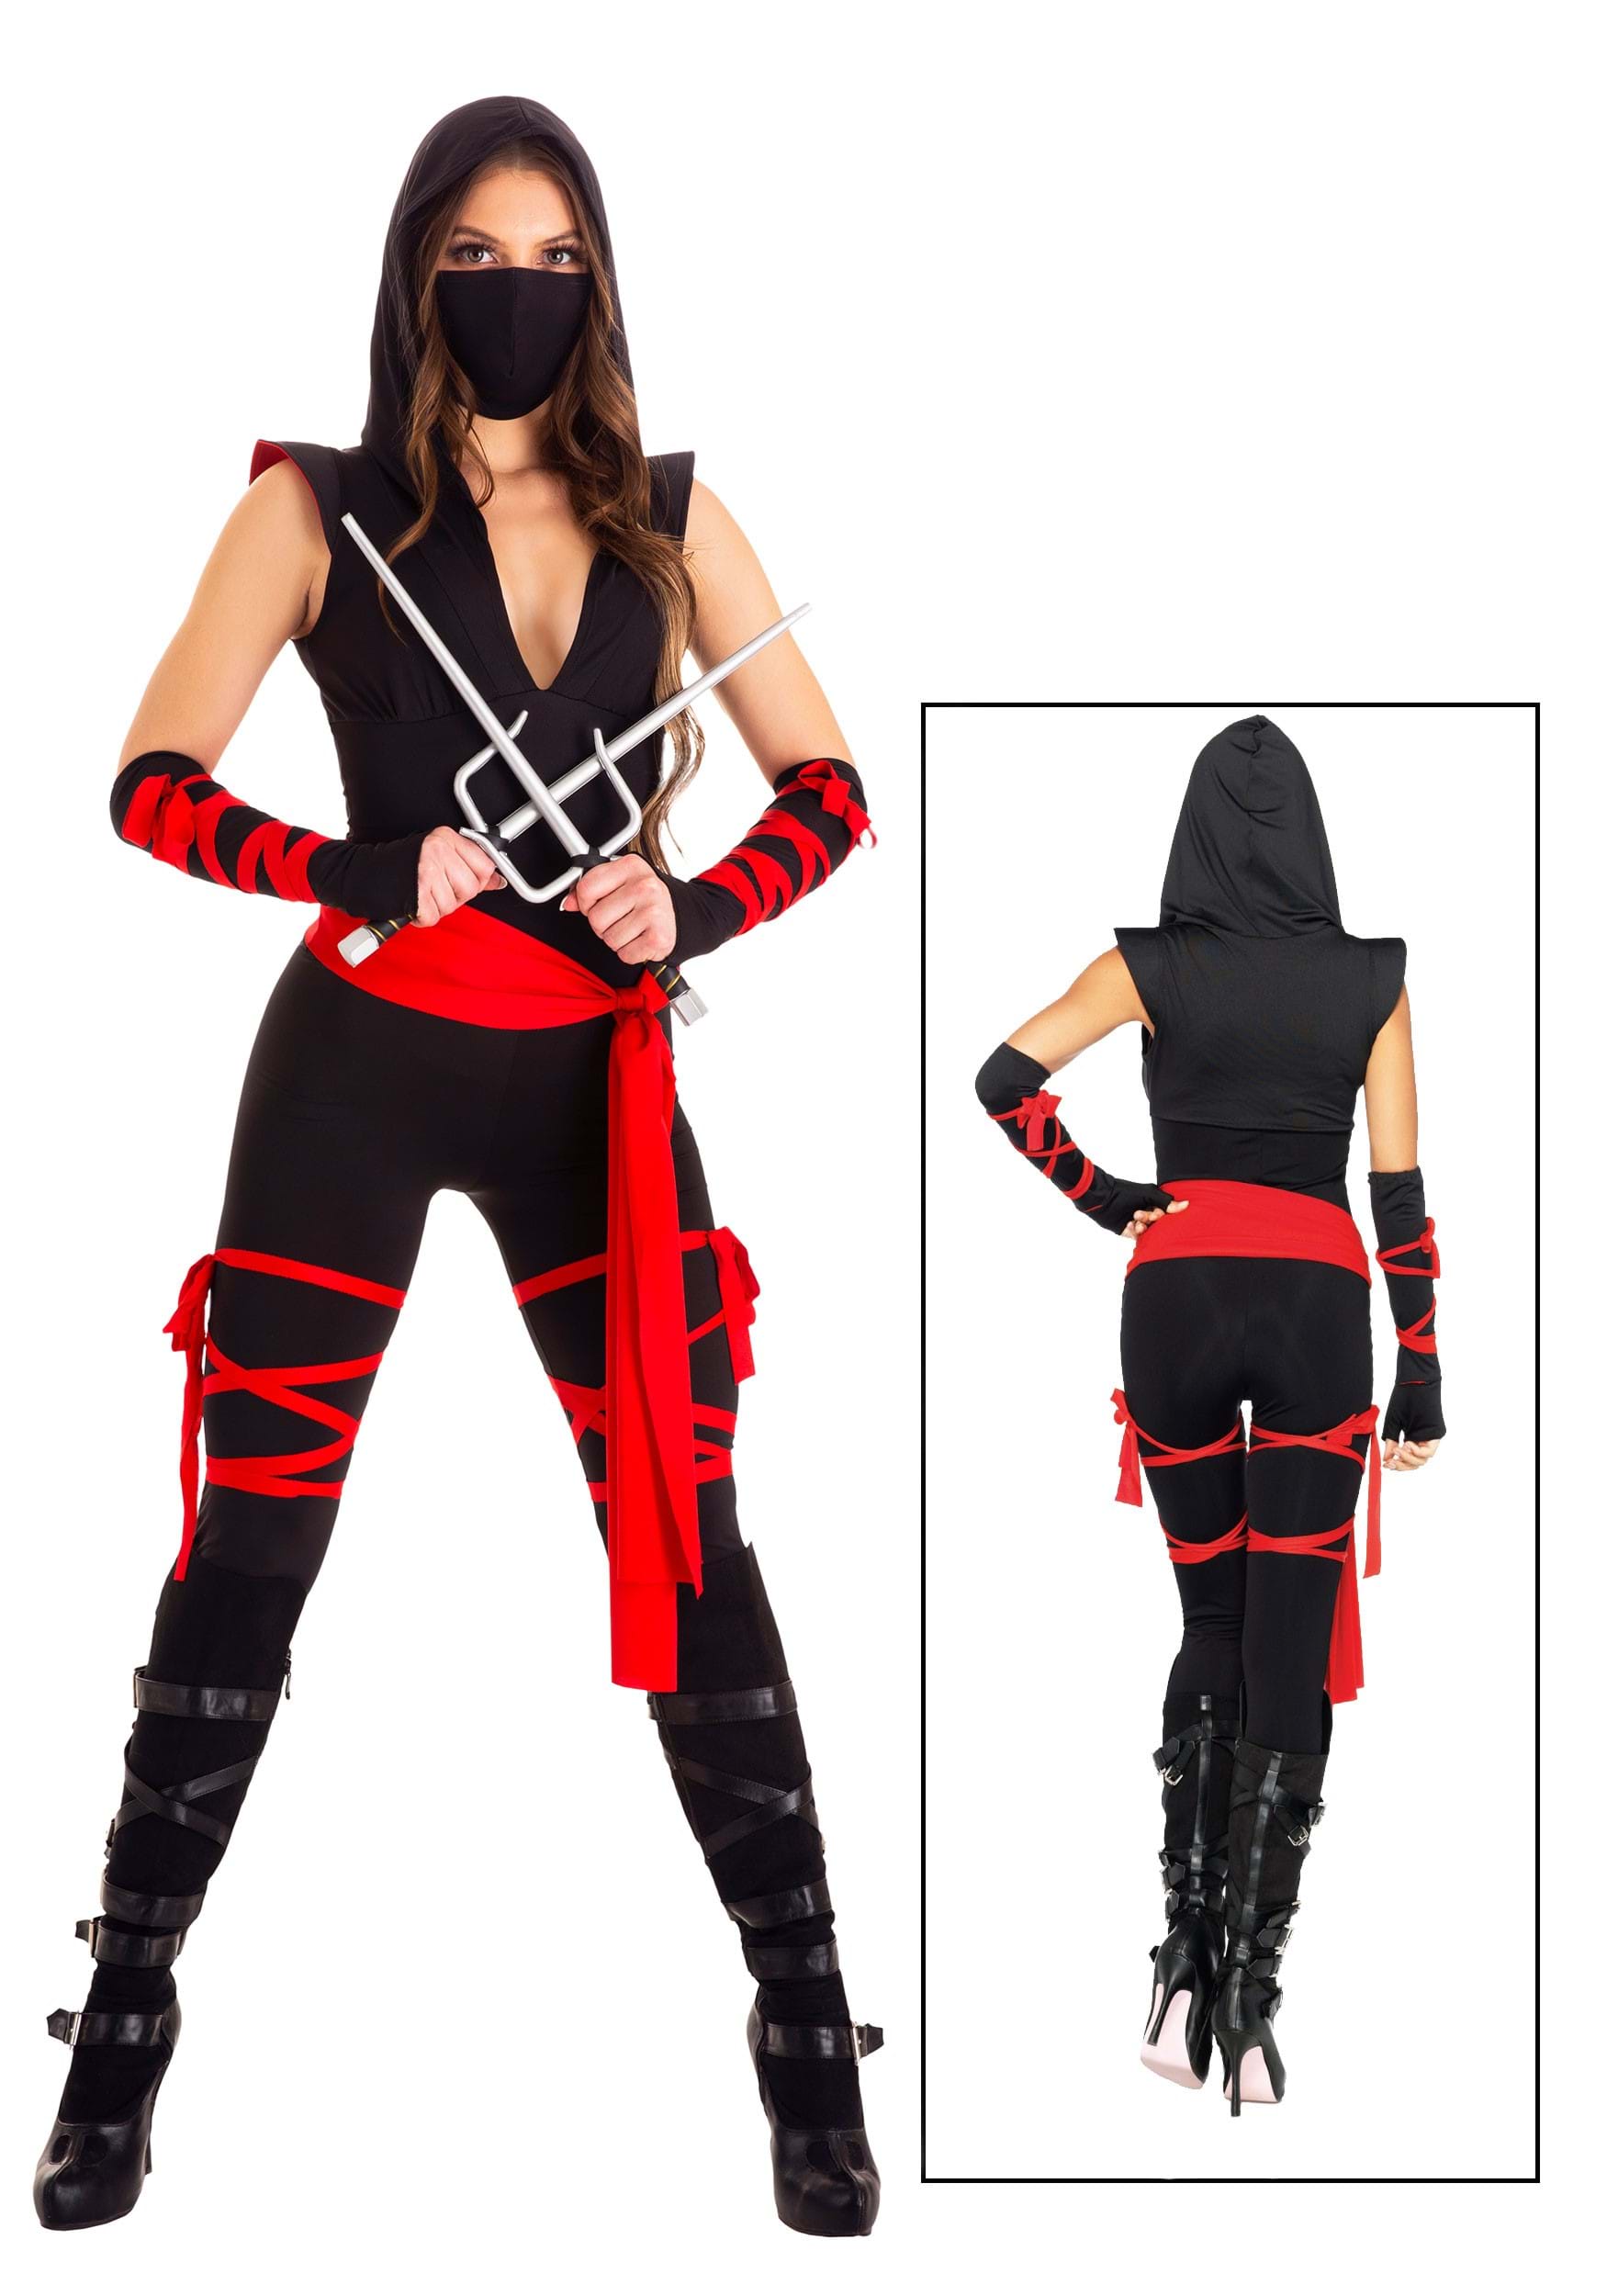 https://images.fun.com/products/14257/1-1/sexy-deadly-ninja-womens-costume-update1.jpg